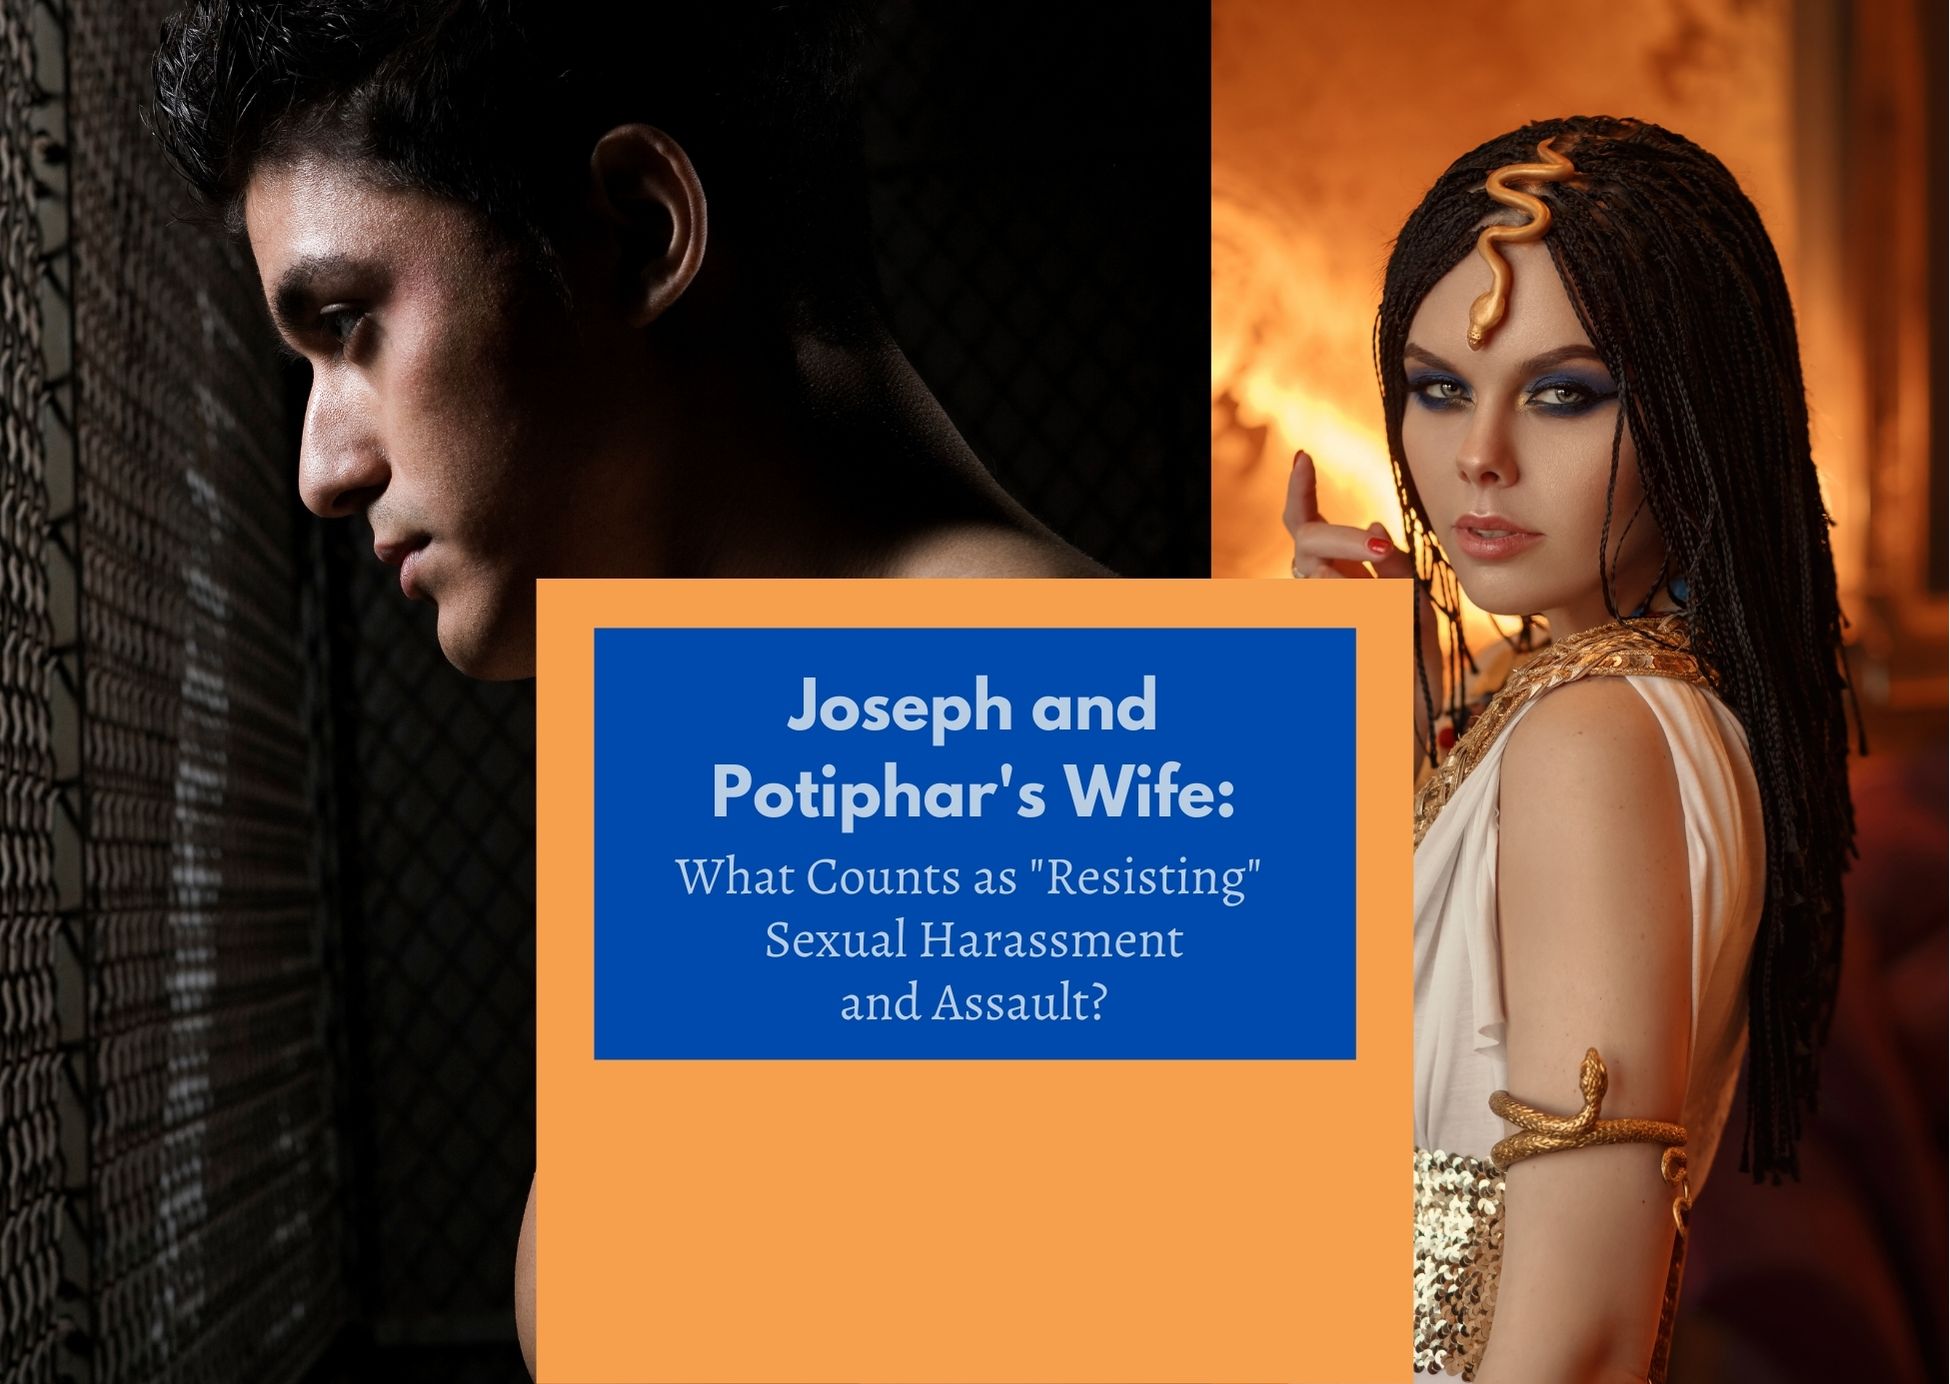 Joseph and Potiphars Wife Resisting Sexual Harassment and Assault Life-Saving Divorce